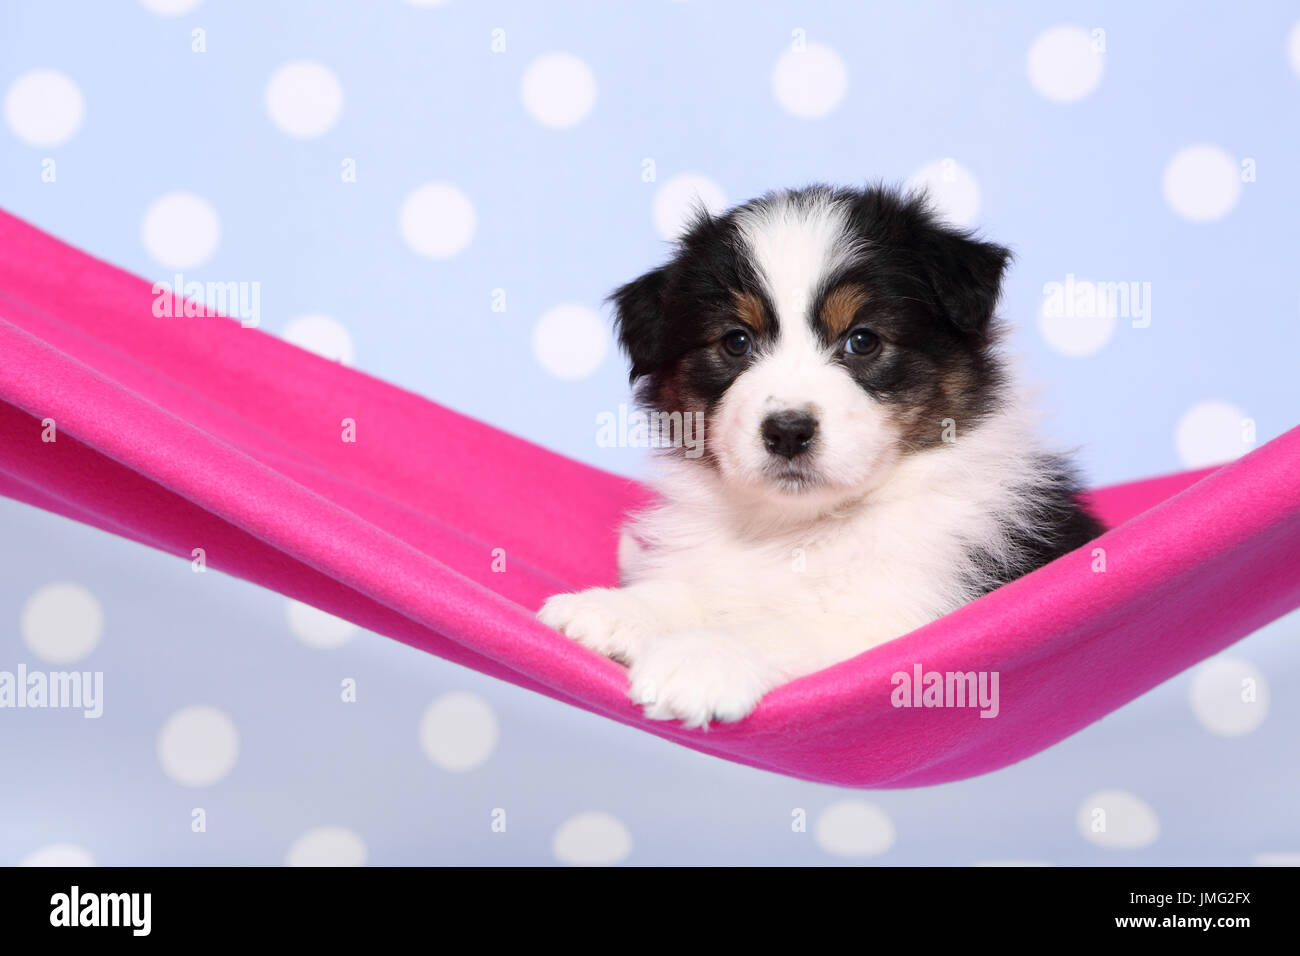 Australian Shepherd. Puppy (6 weeks old) lying in a pink hammock. Studio picture against a blue background with white polka dots. Germany Stock Photo